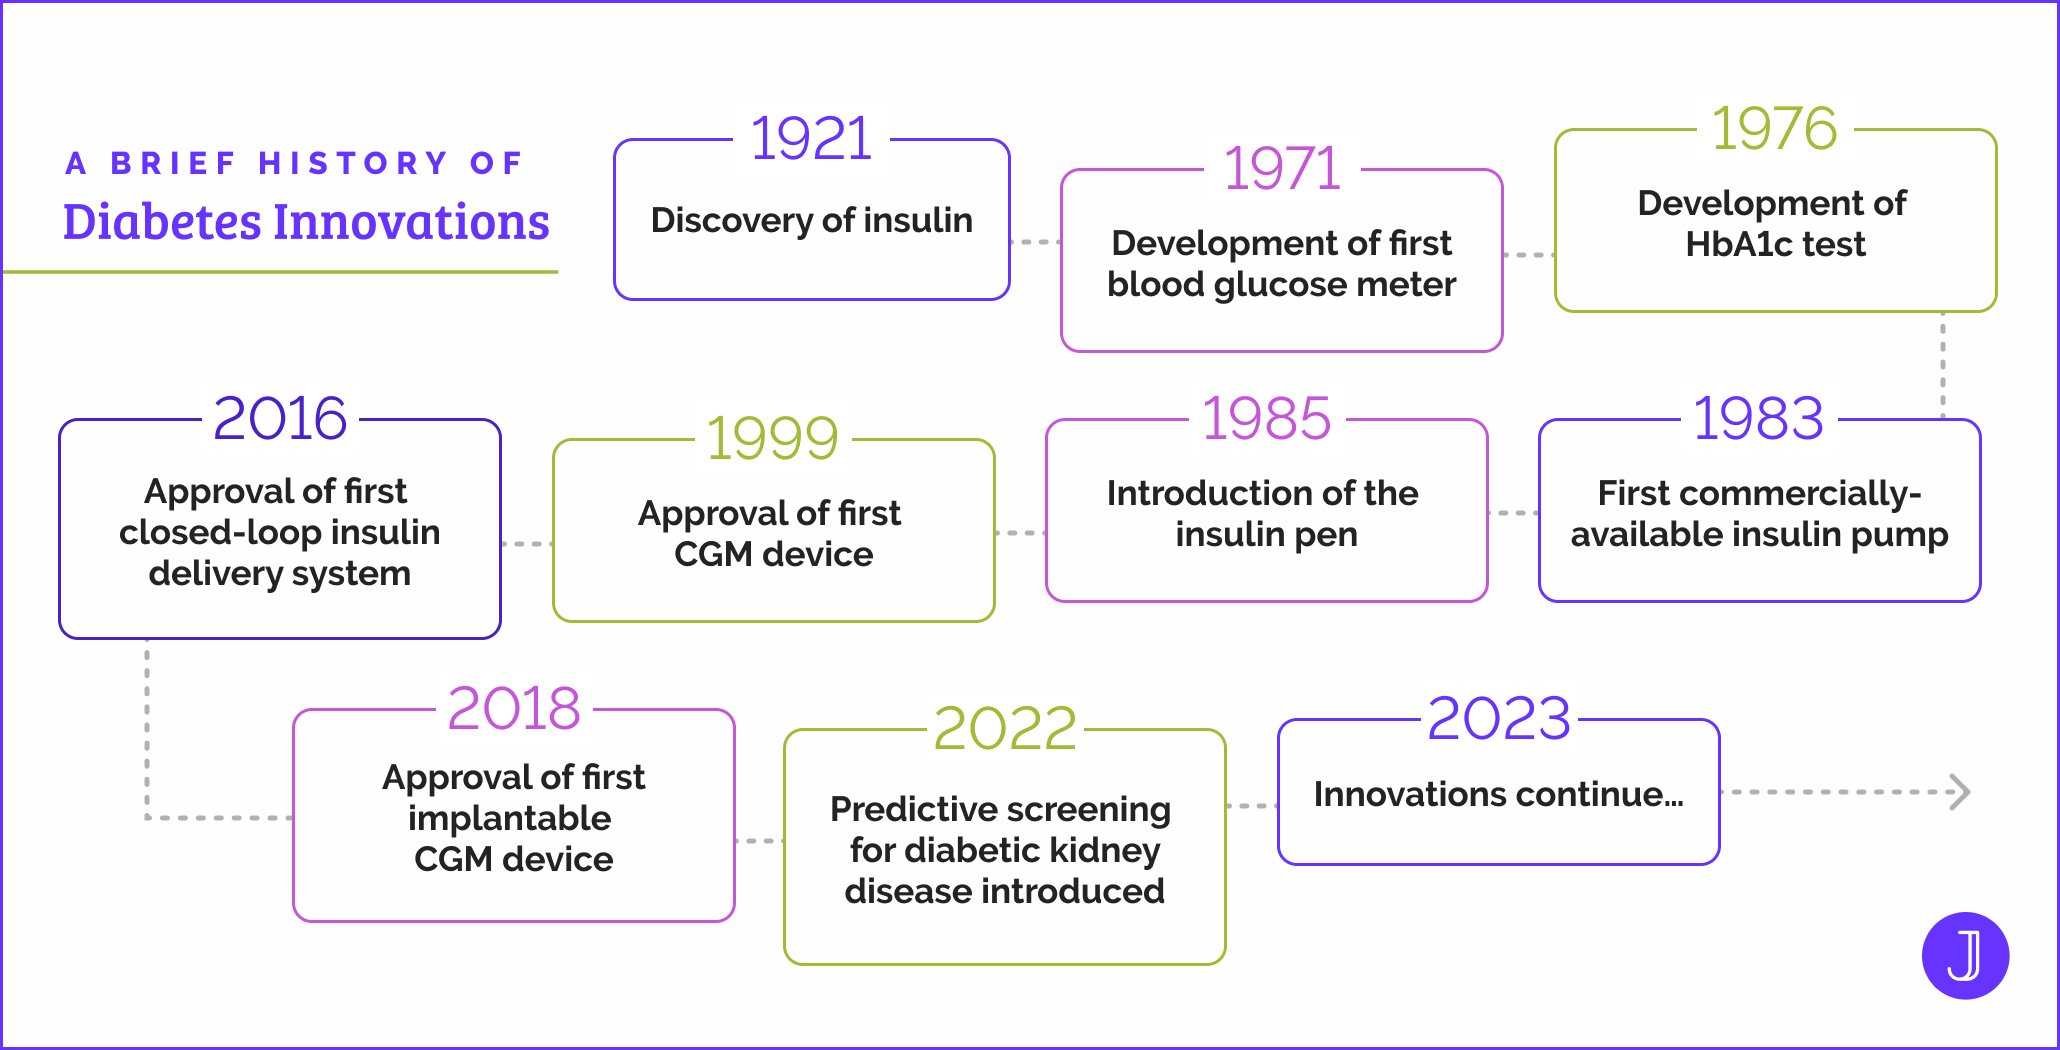 Diabetes Innovation Timeline from 1921 through 2023